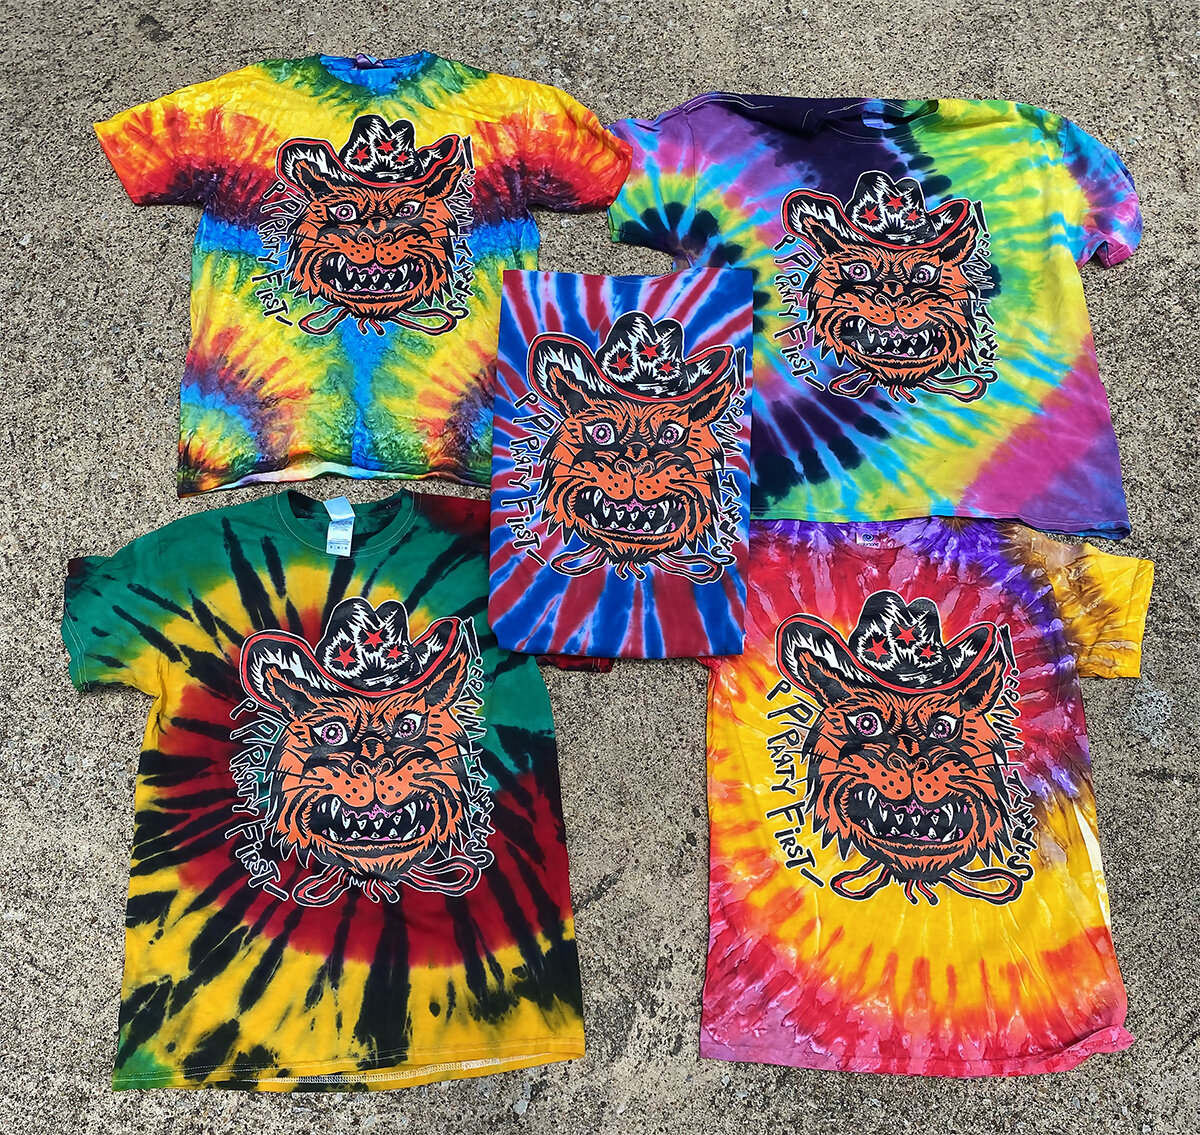 Party First Safety Maybe - Tye Dye Party Cat (Limited Edition) (Shipping Included in Price)